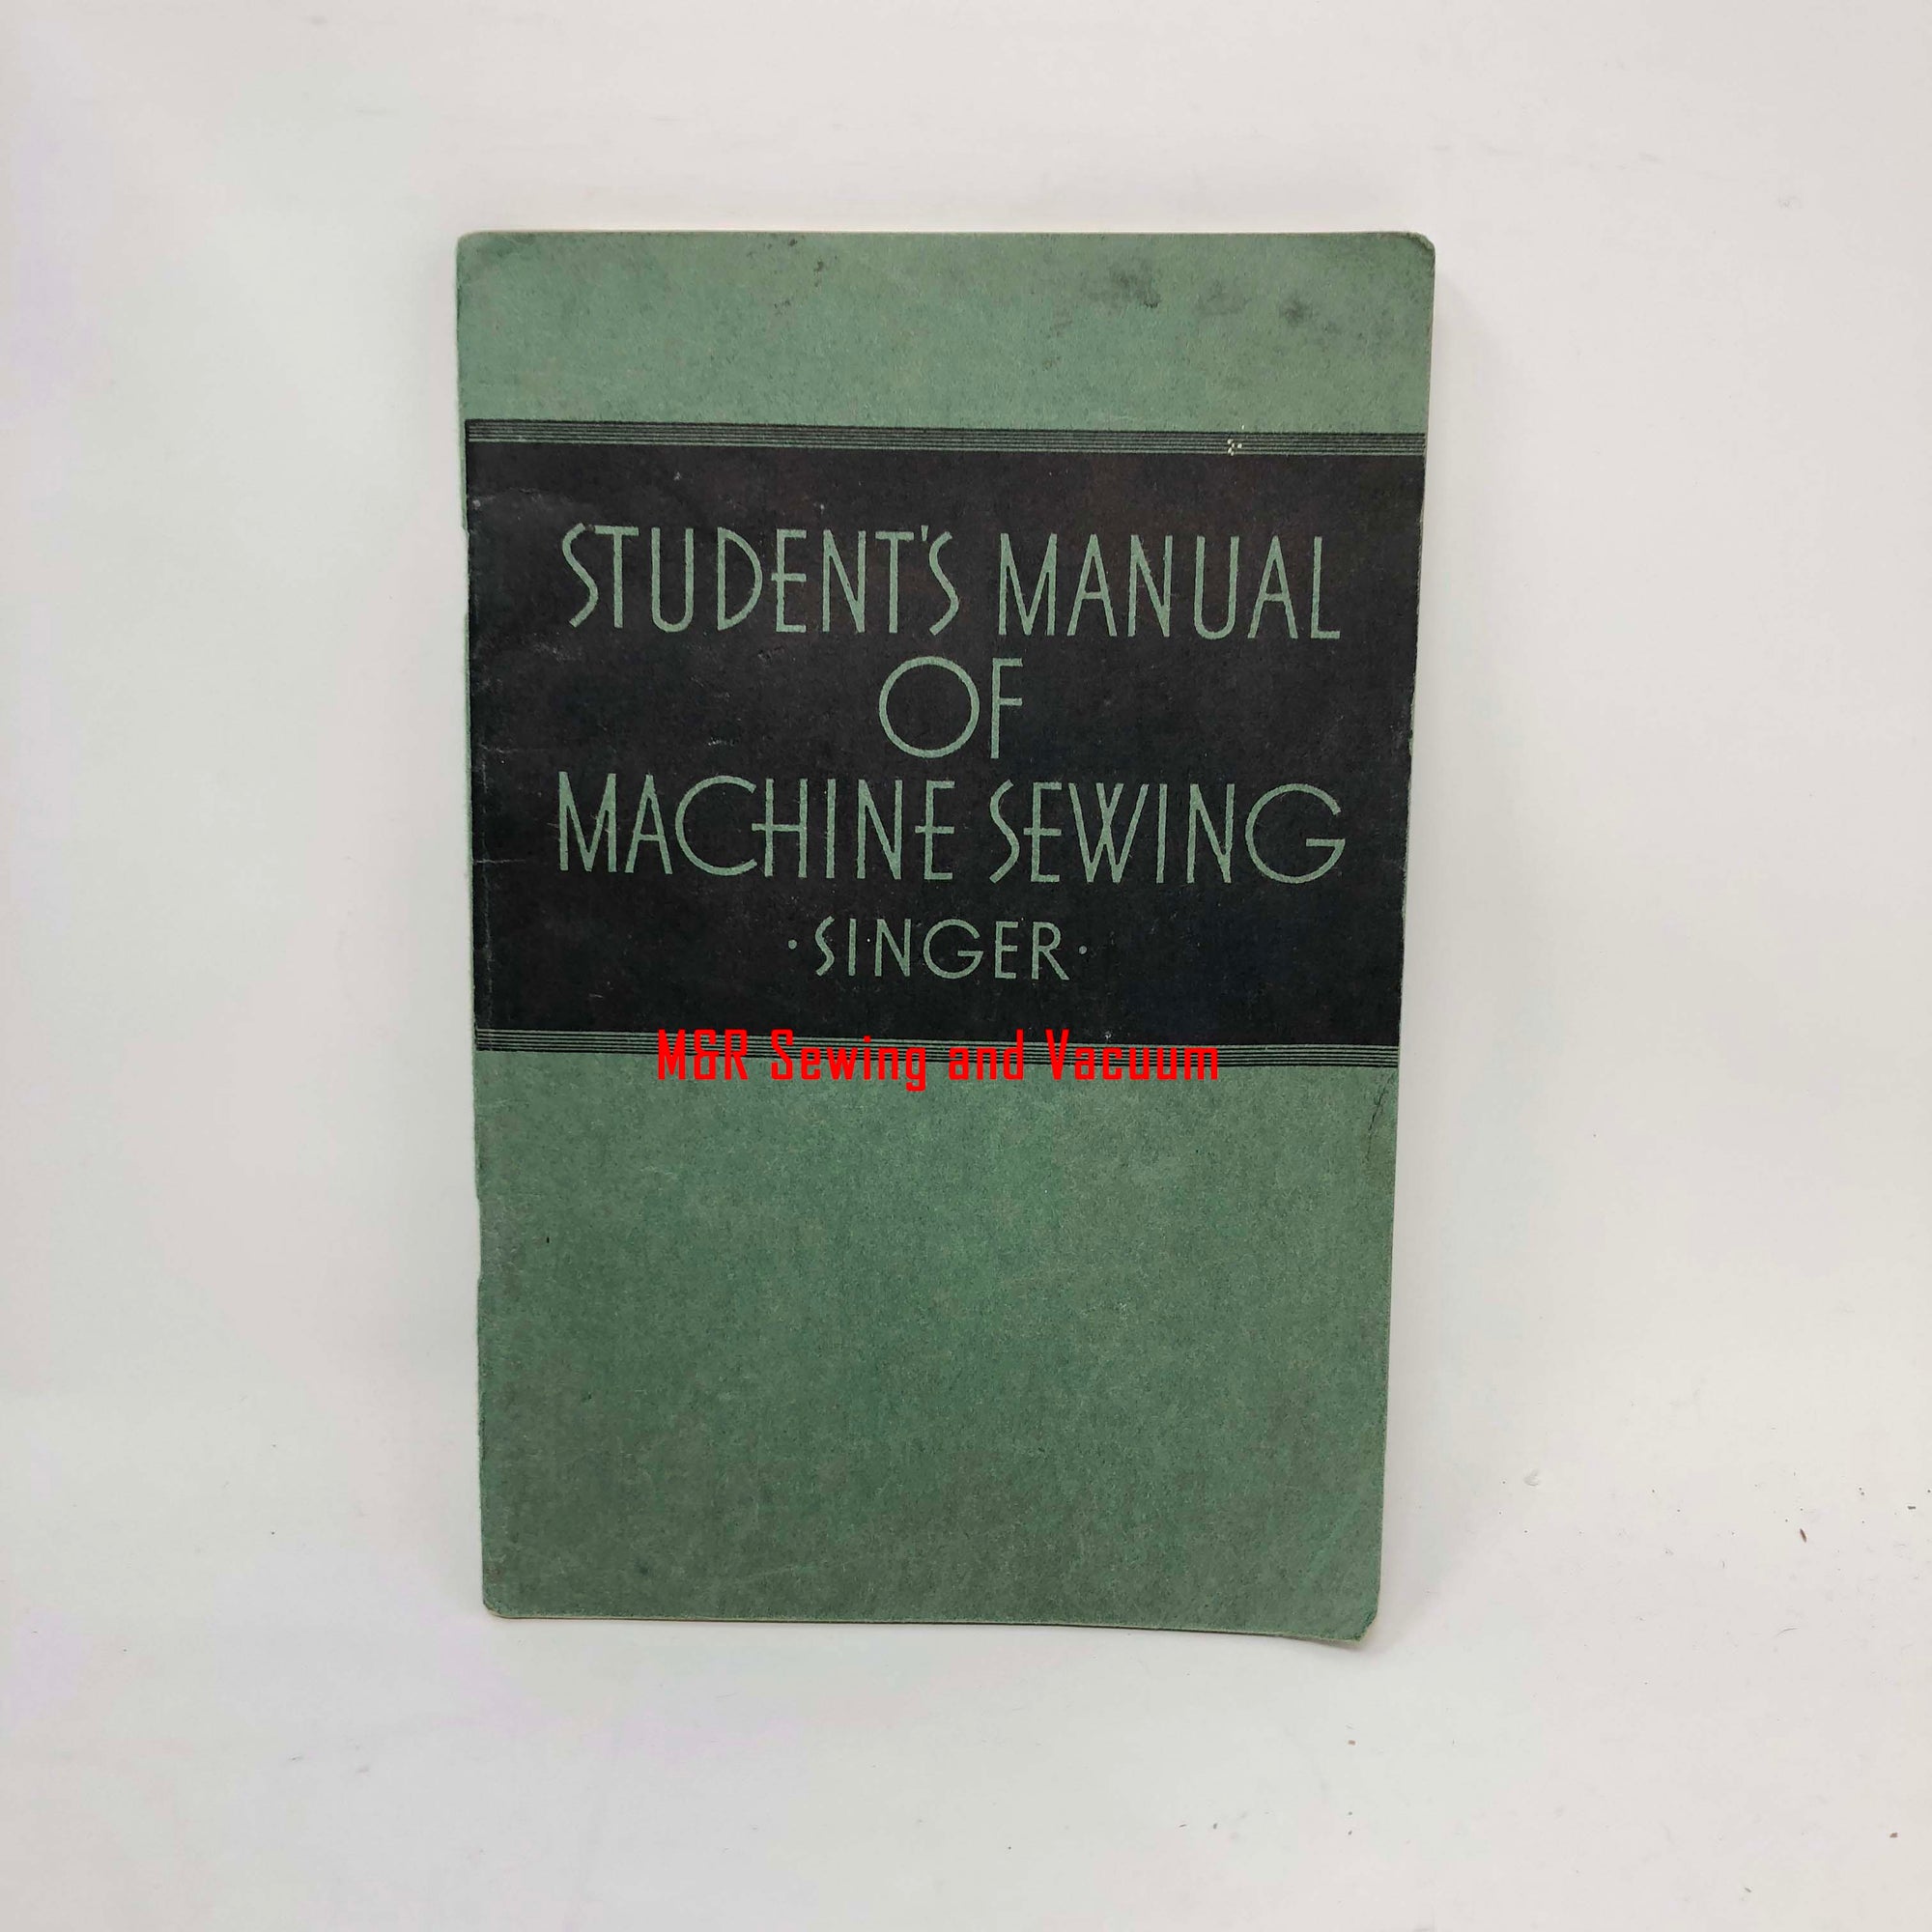 Student's Manual of Machine Sewing